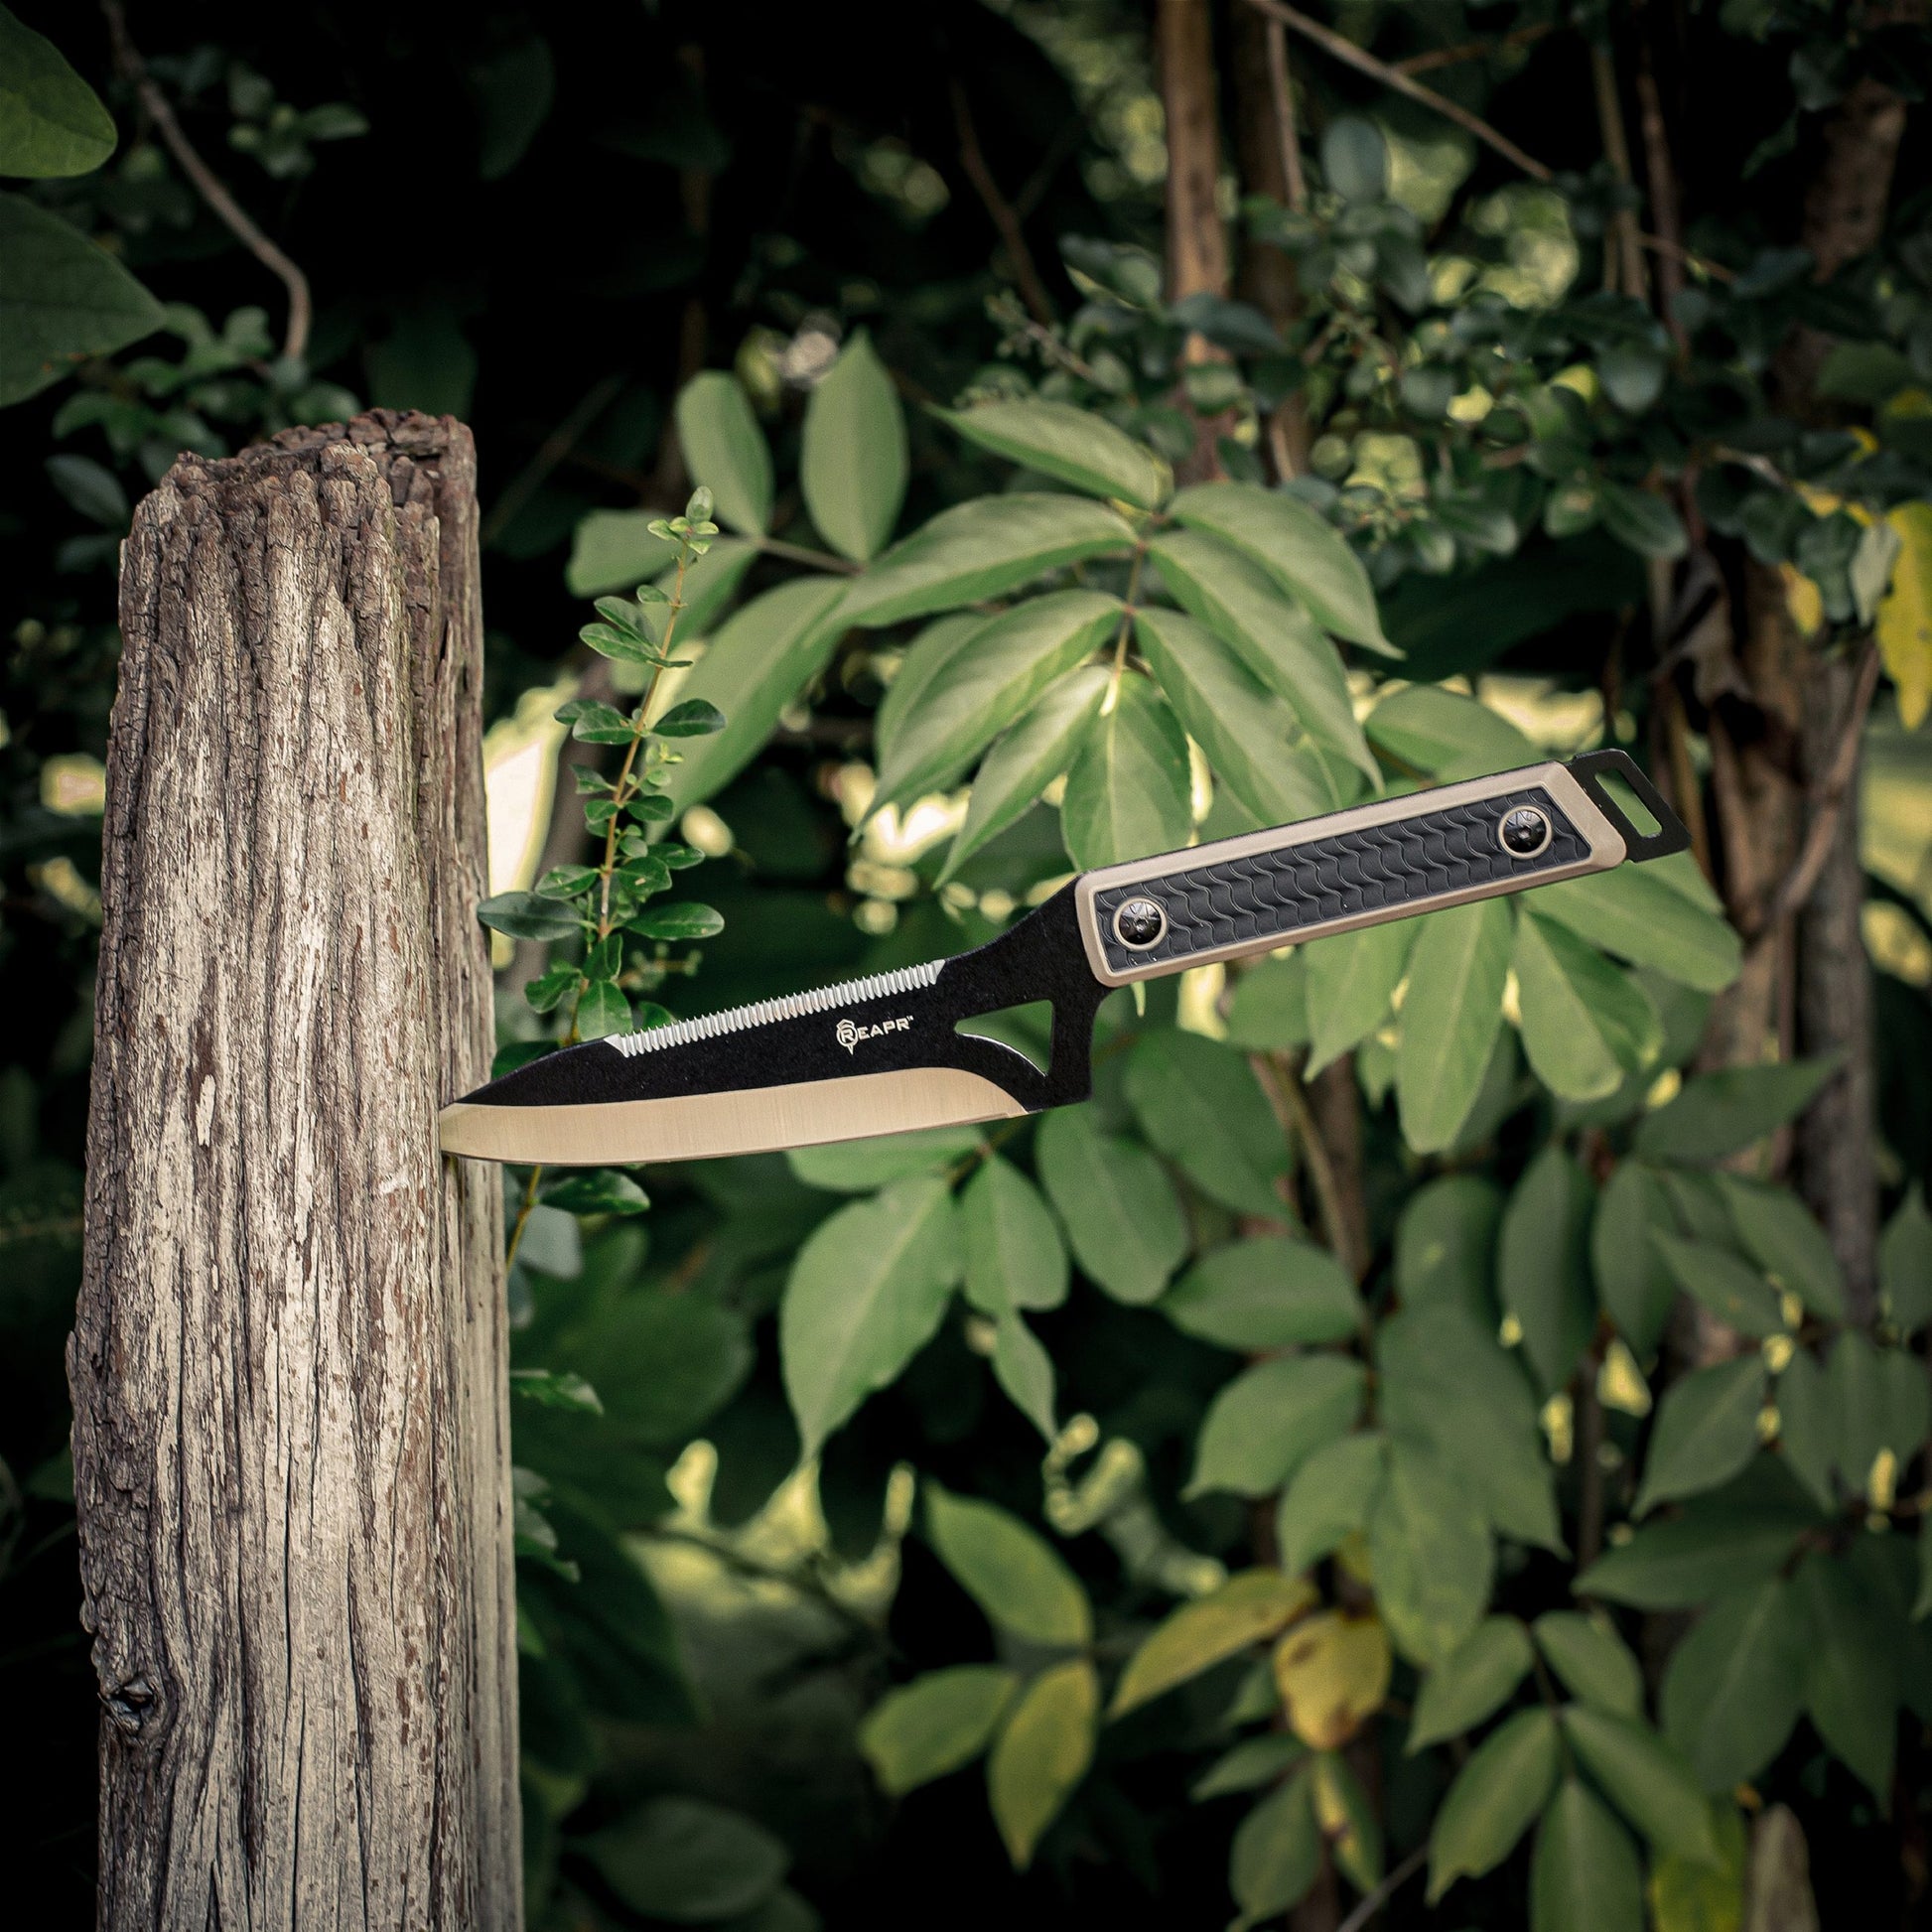 You get everything you need with the Reapr Versa Camp Knife. Born in the kitchen but raised in the wild, it’s tough, durable, and versatile. Whatever your campsite cutting needs, this knife can handle it. www.defenceqstore.com.au